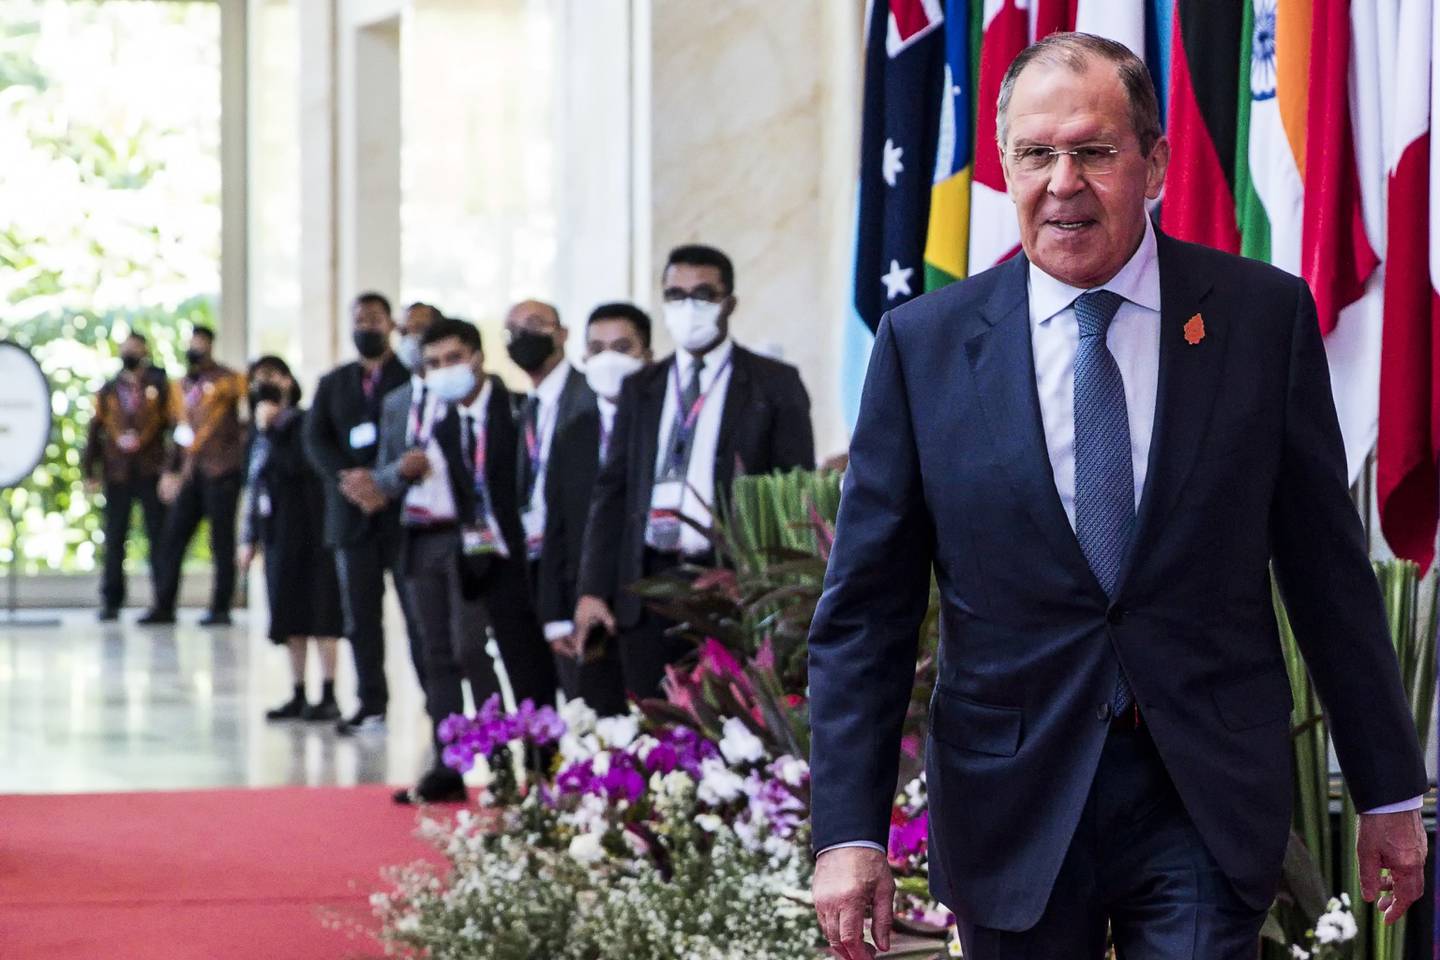 Russian Foreign Minister Sergei Lavrov arrives at the G20 Foreign Ministers Meeting in Bali, Indonesia. EPA 